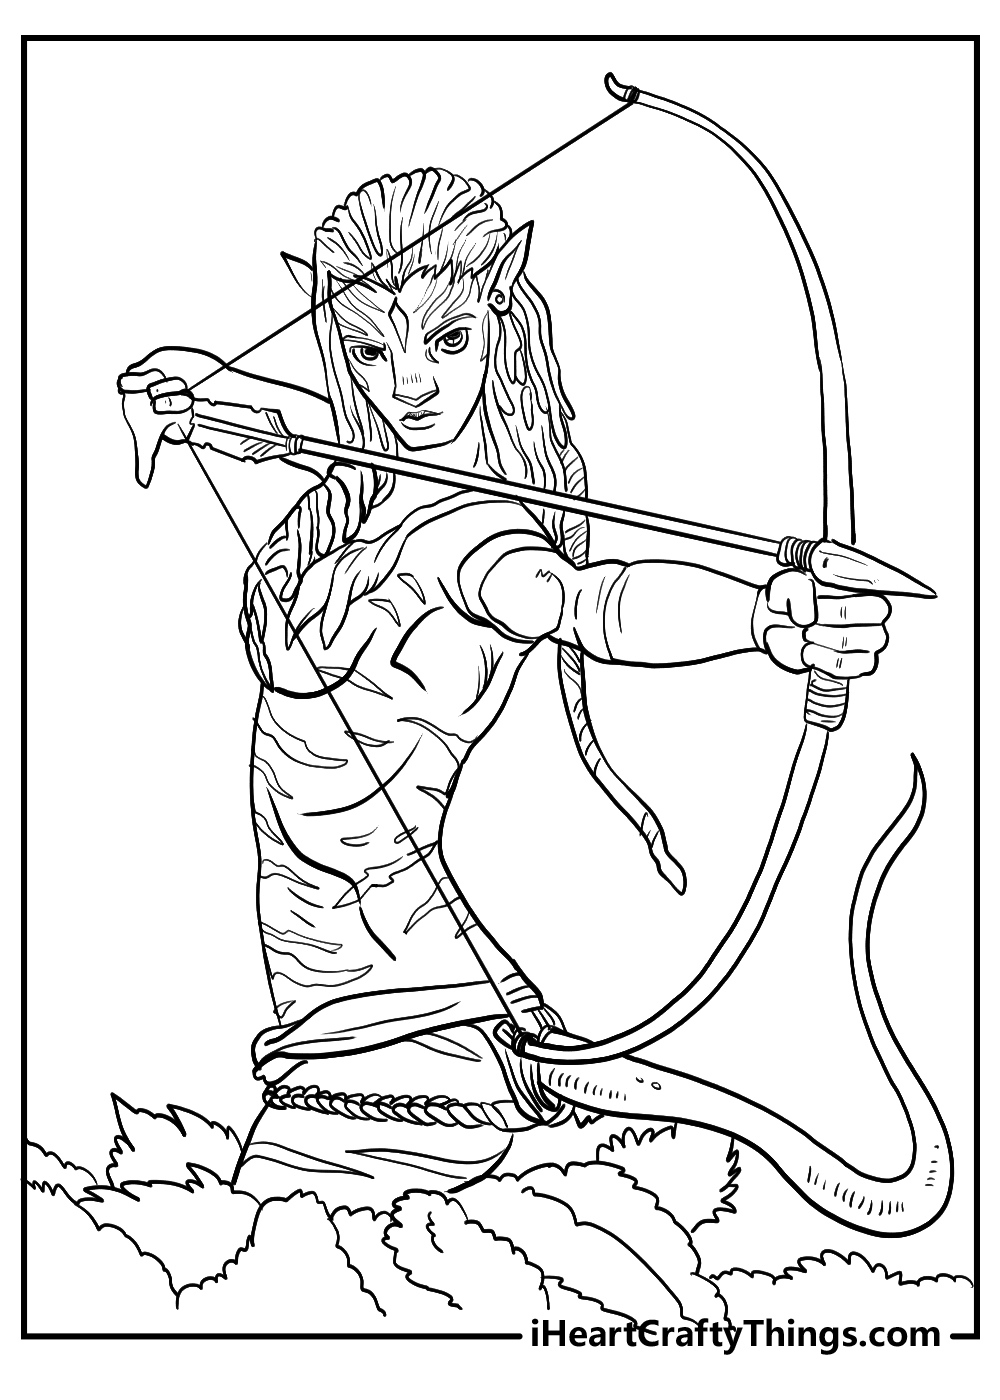 avatar coloring pages for adults